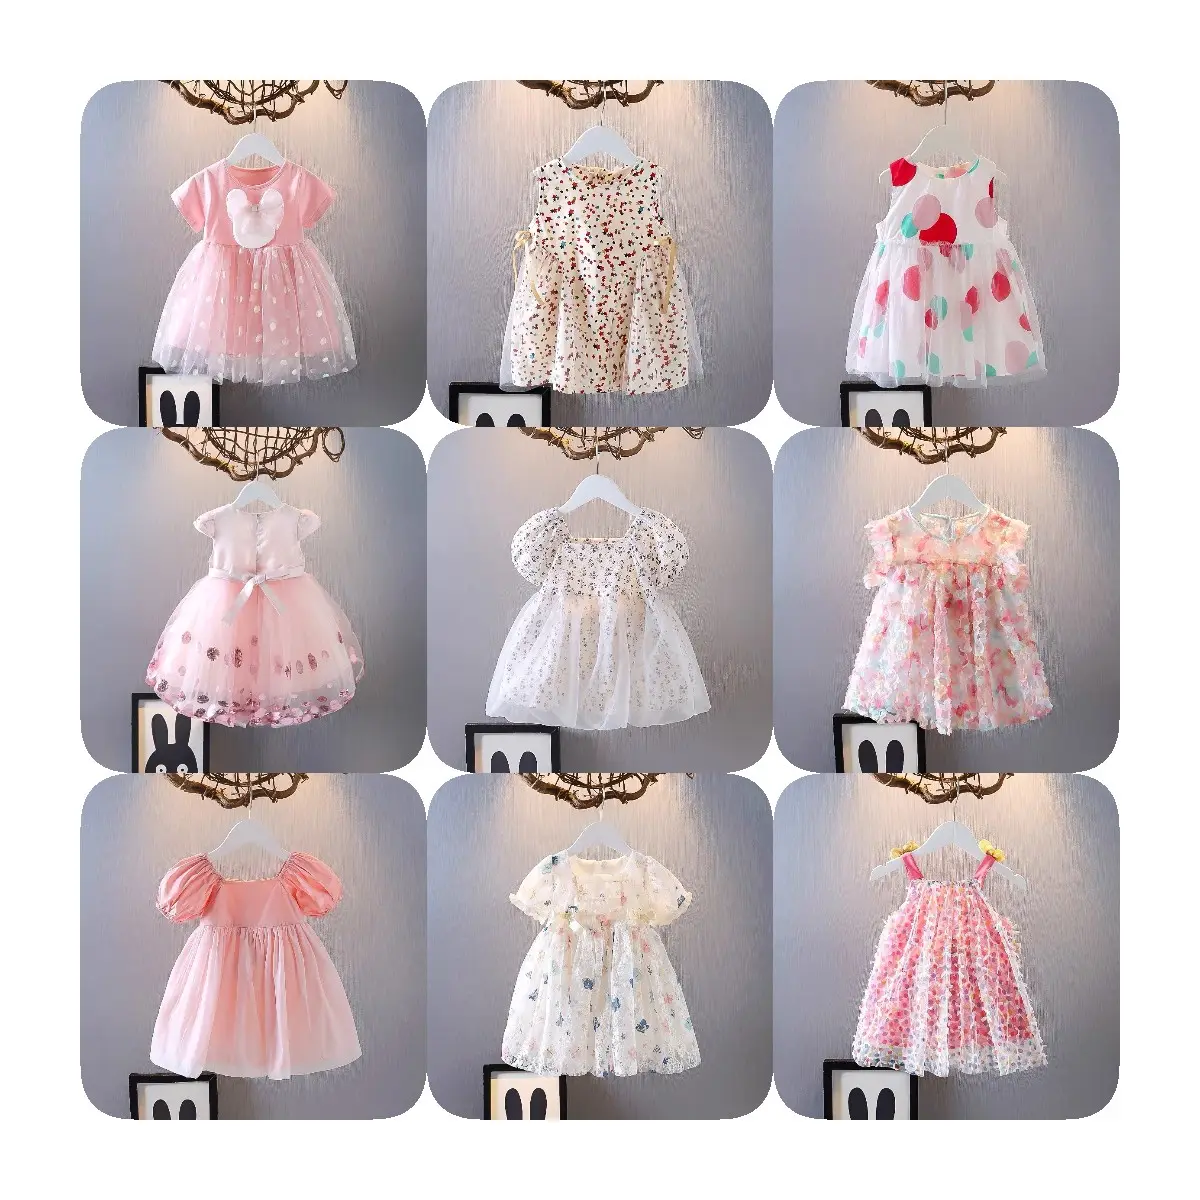 2-14 years baby lace party frock princess wedding ball gown design kid birthday embroidery toddler girl dress